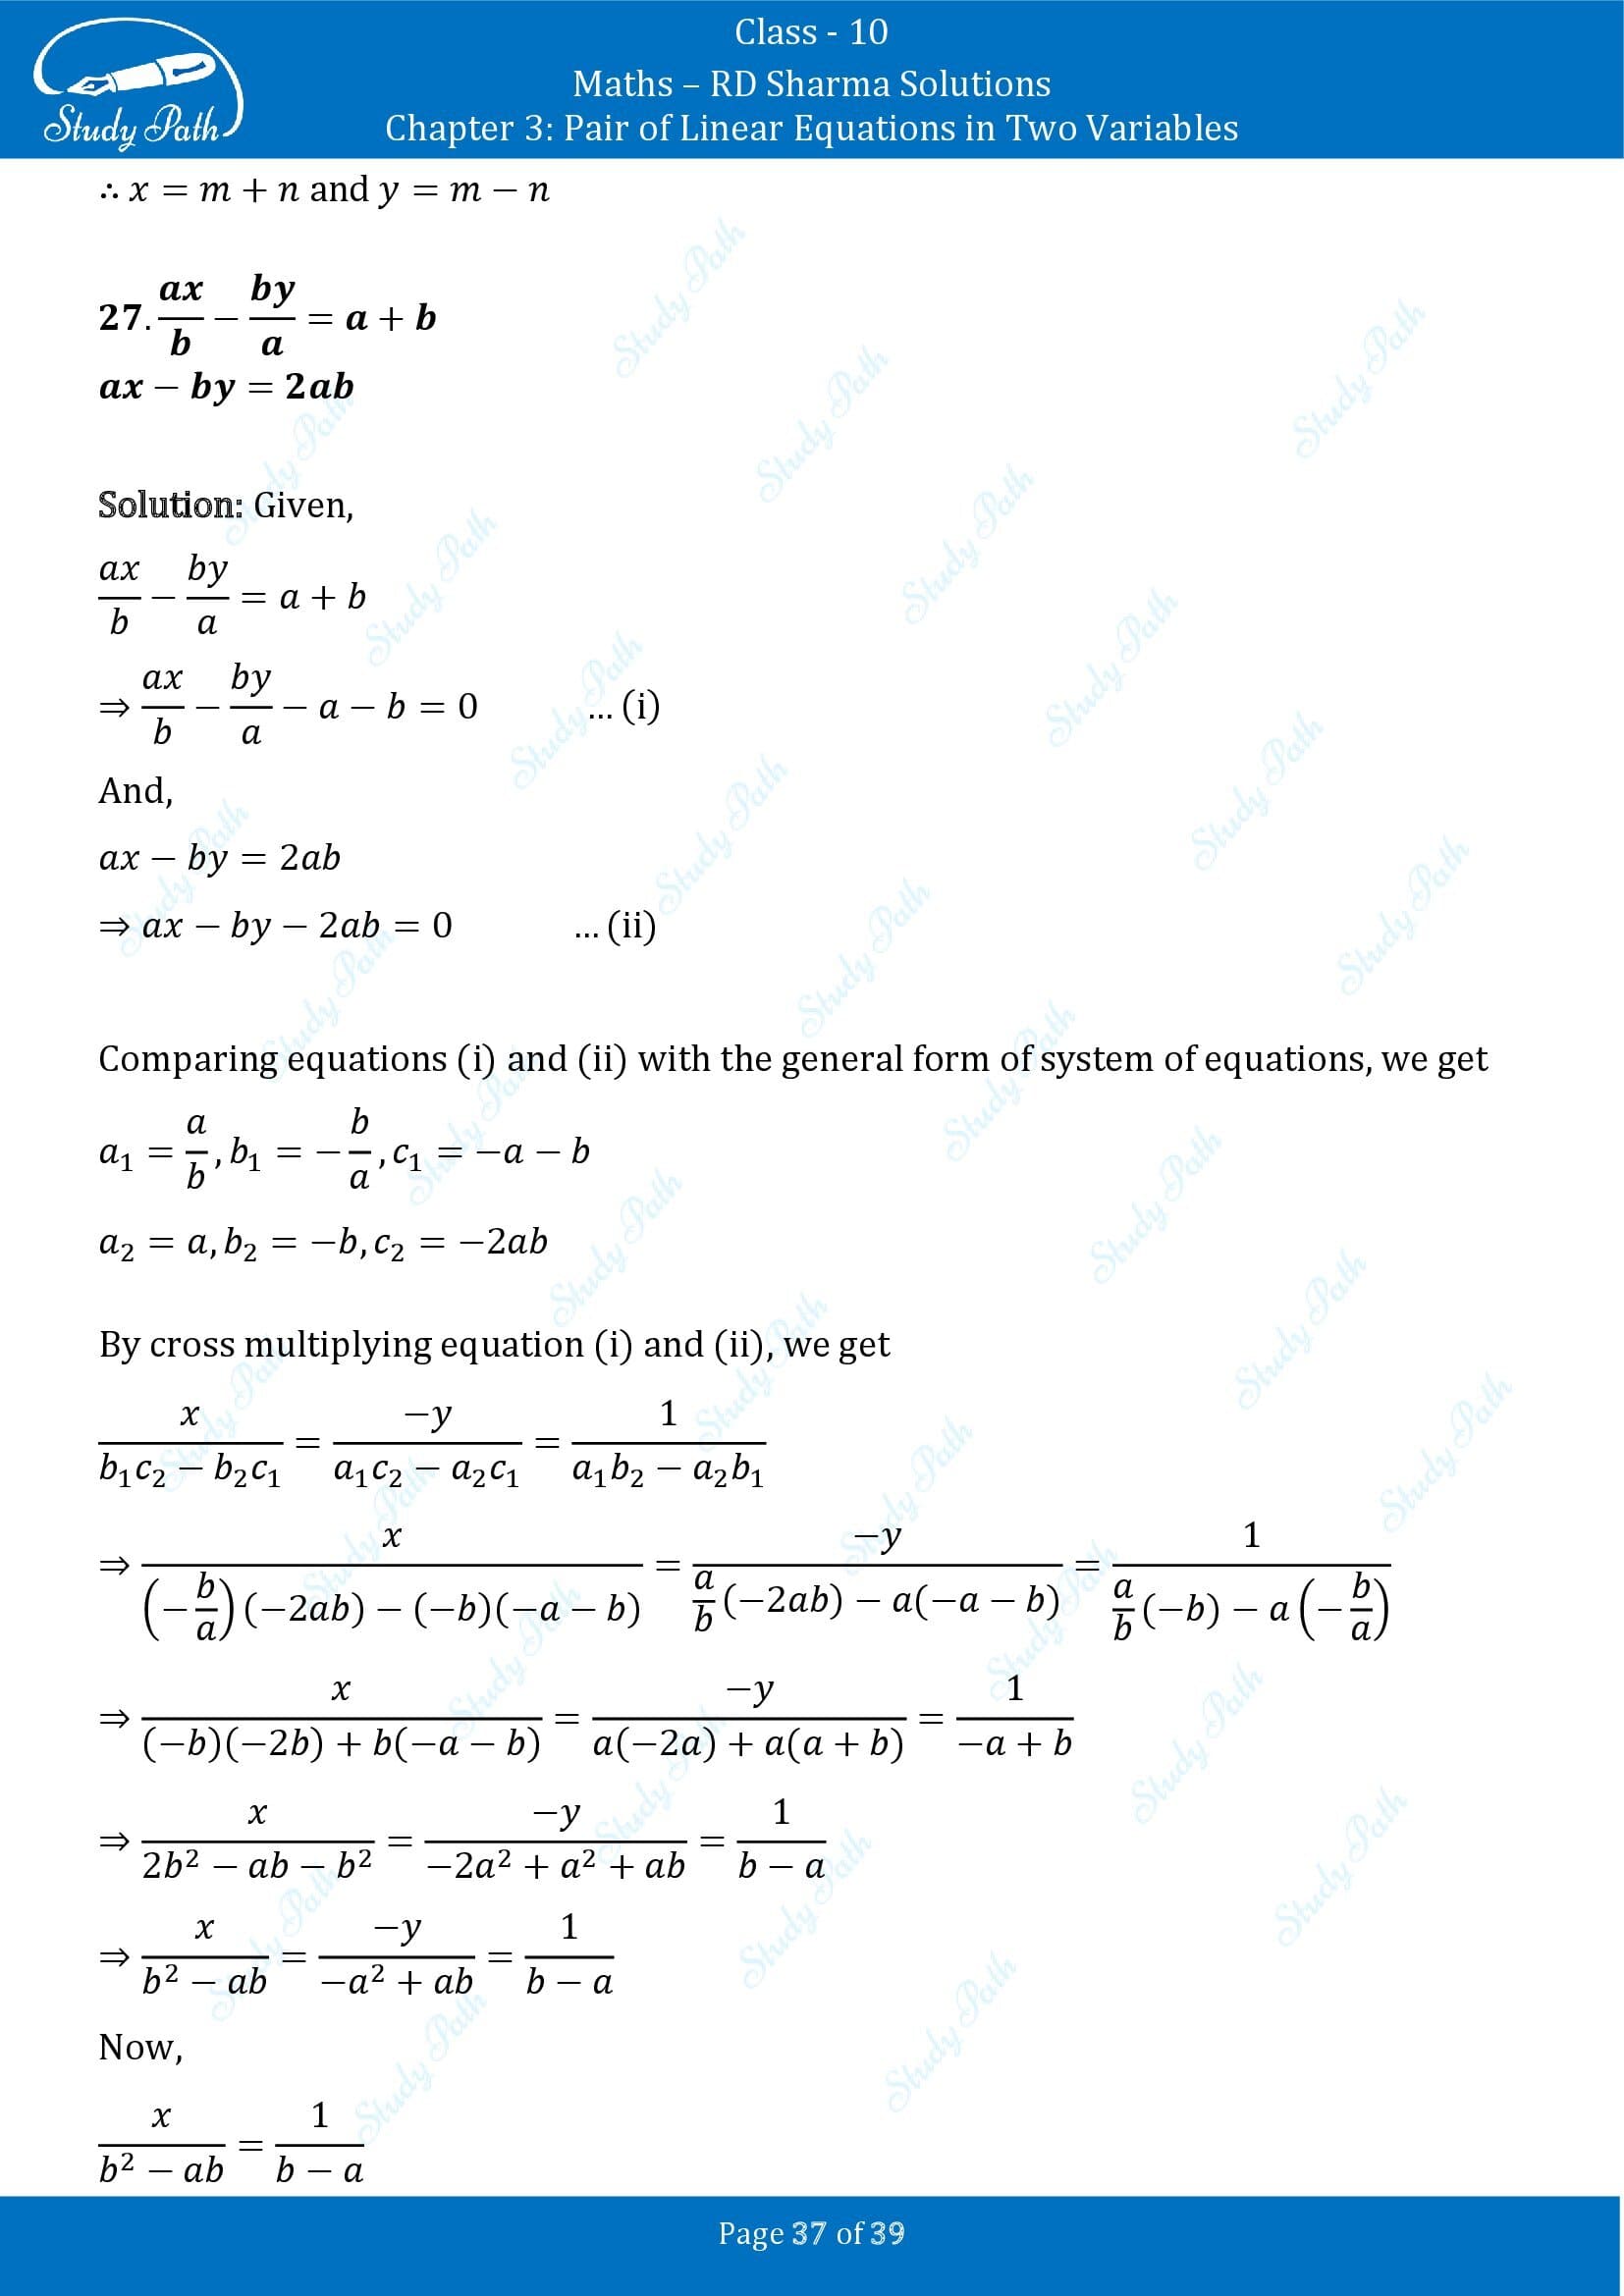 RD Sharma Solutions Class 10 Chapter 3 Pair of Linear Equations in Two Variables Exercise 3.4 00037